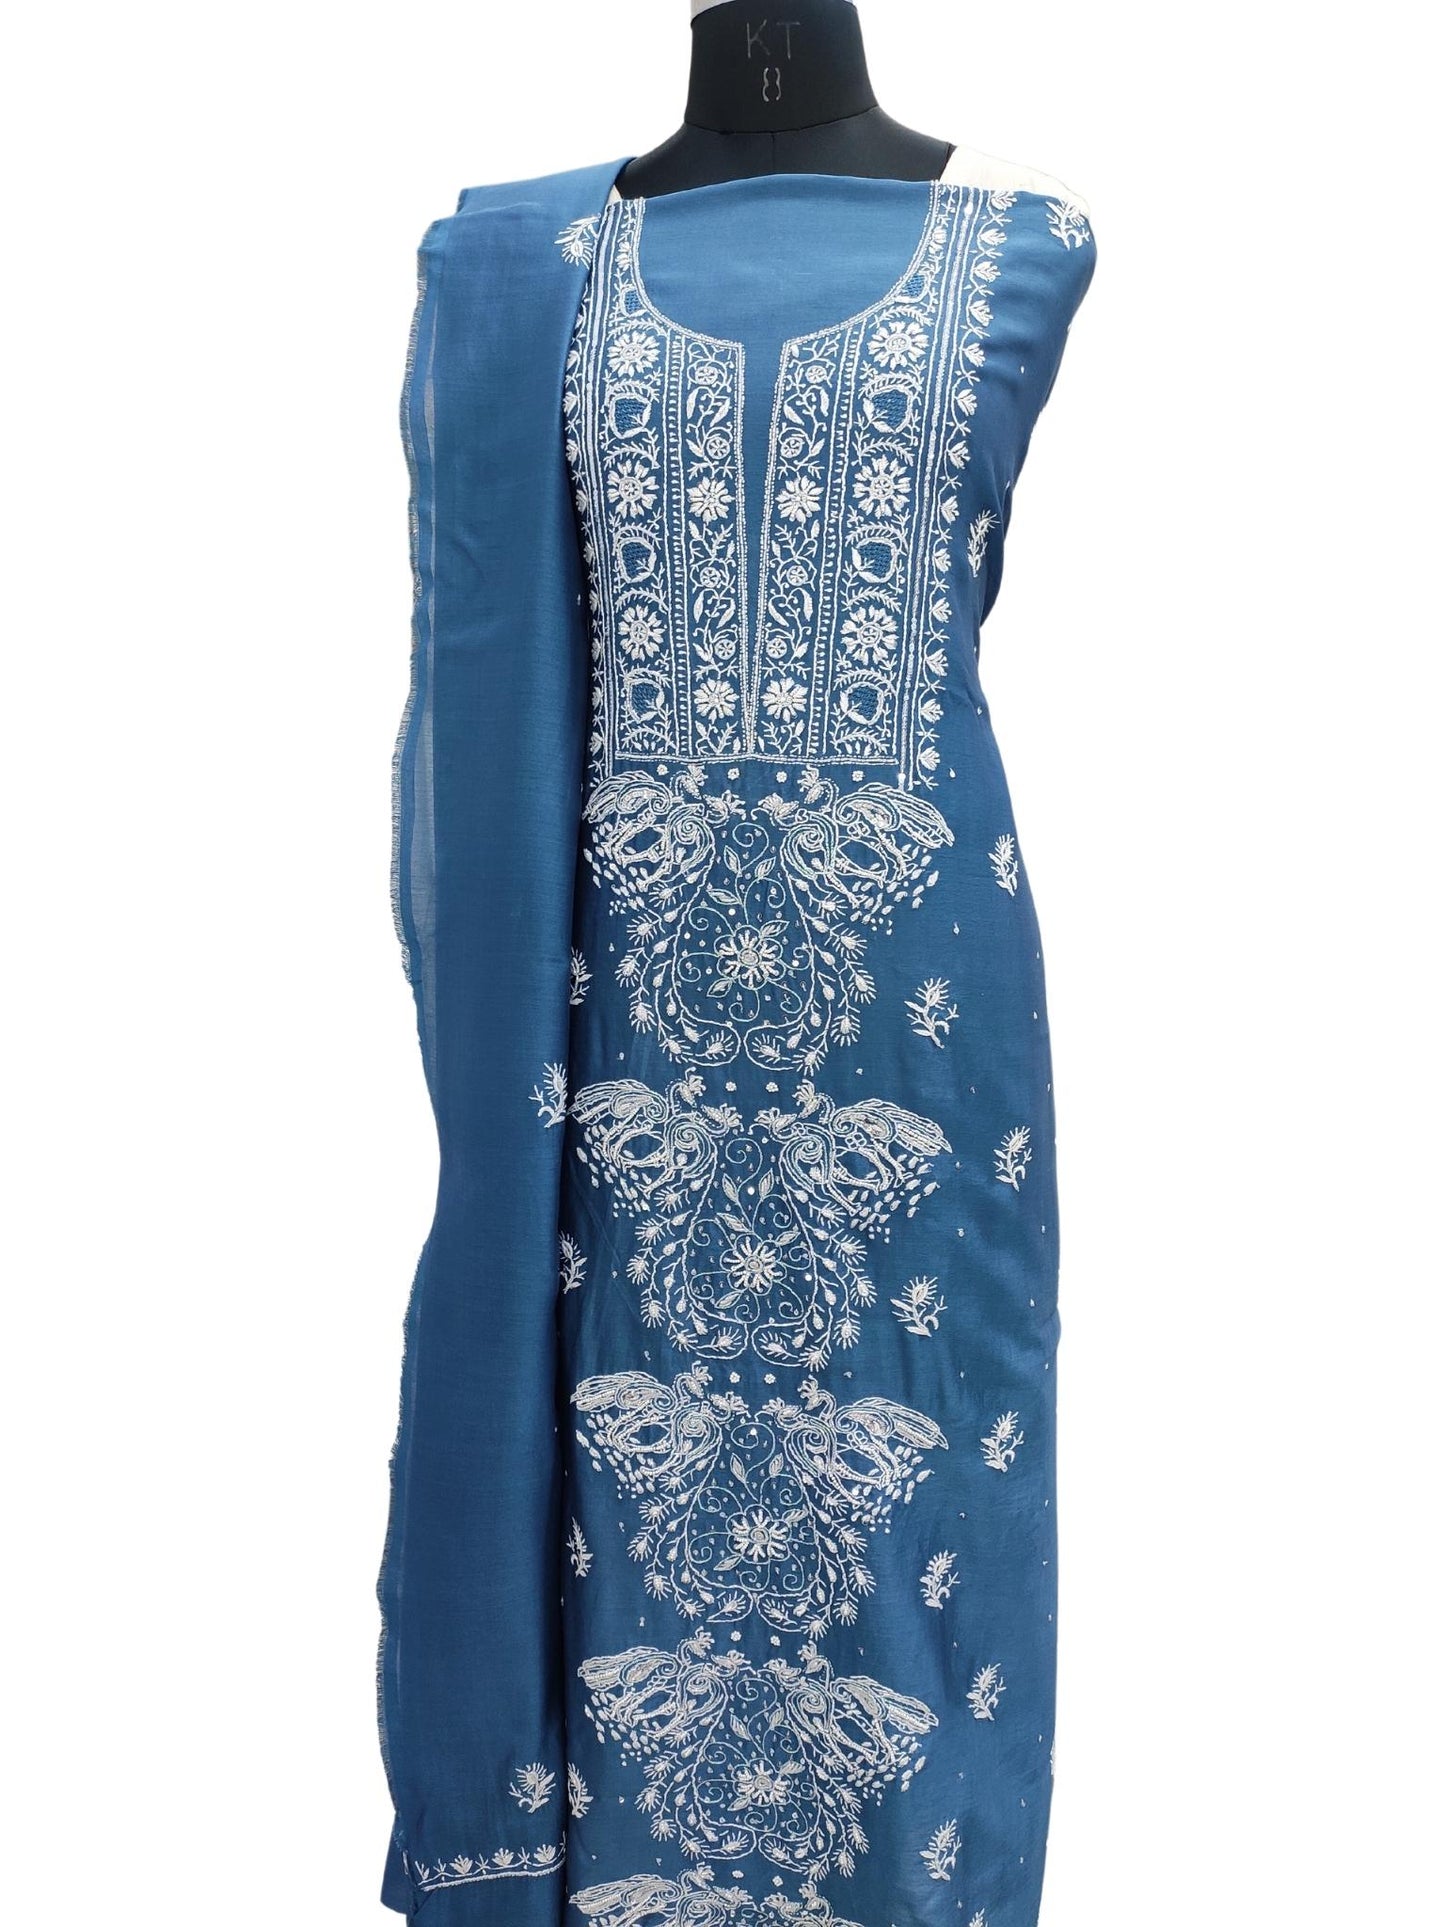 Shyamal Chikan Hand Embroidered Peacock Blue Chanderi Lucknowi Chikankari Unstitched Suit Piece with Pearl & Sequin Work (Kurta Dupatta Set) - S21170